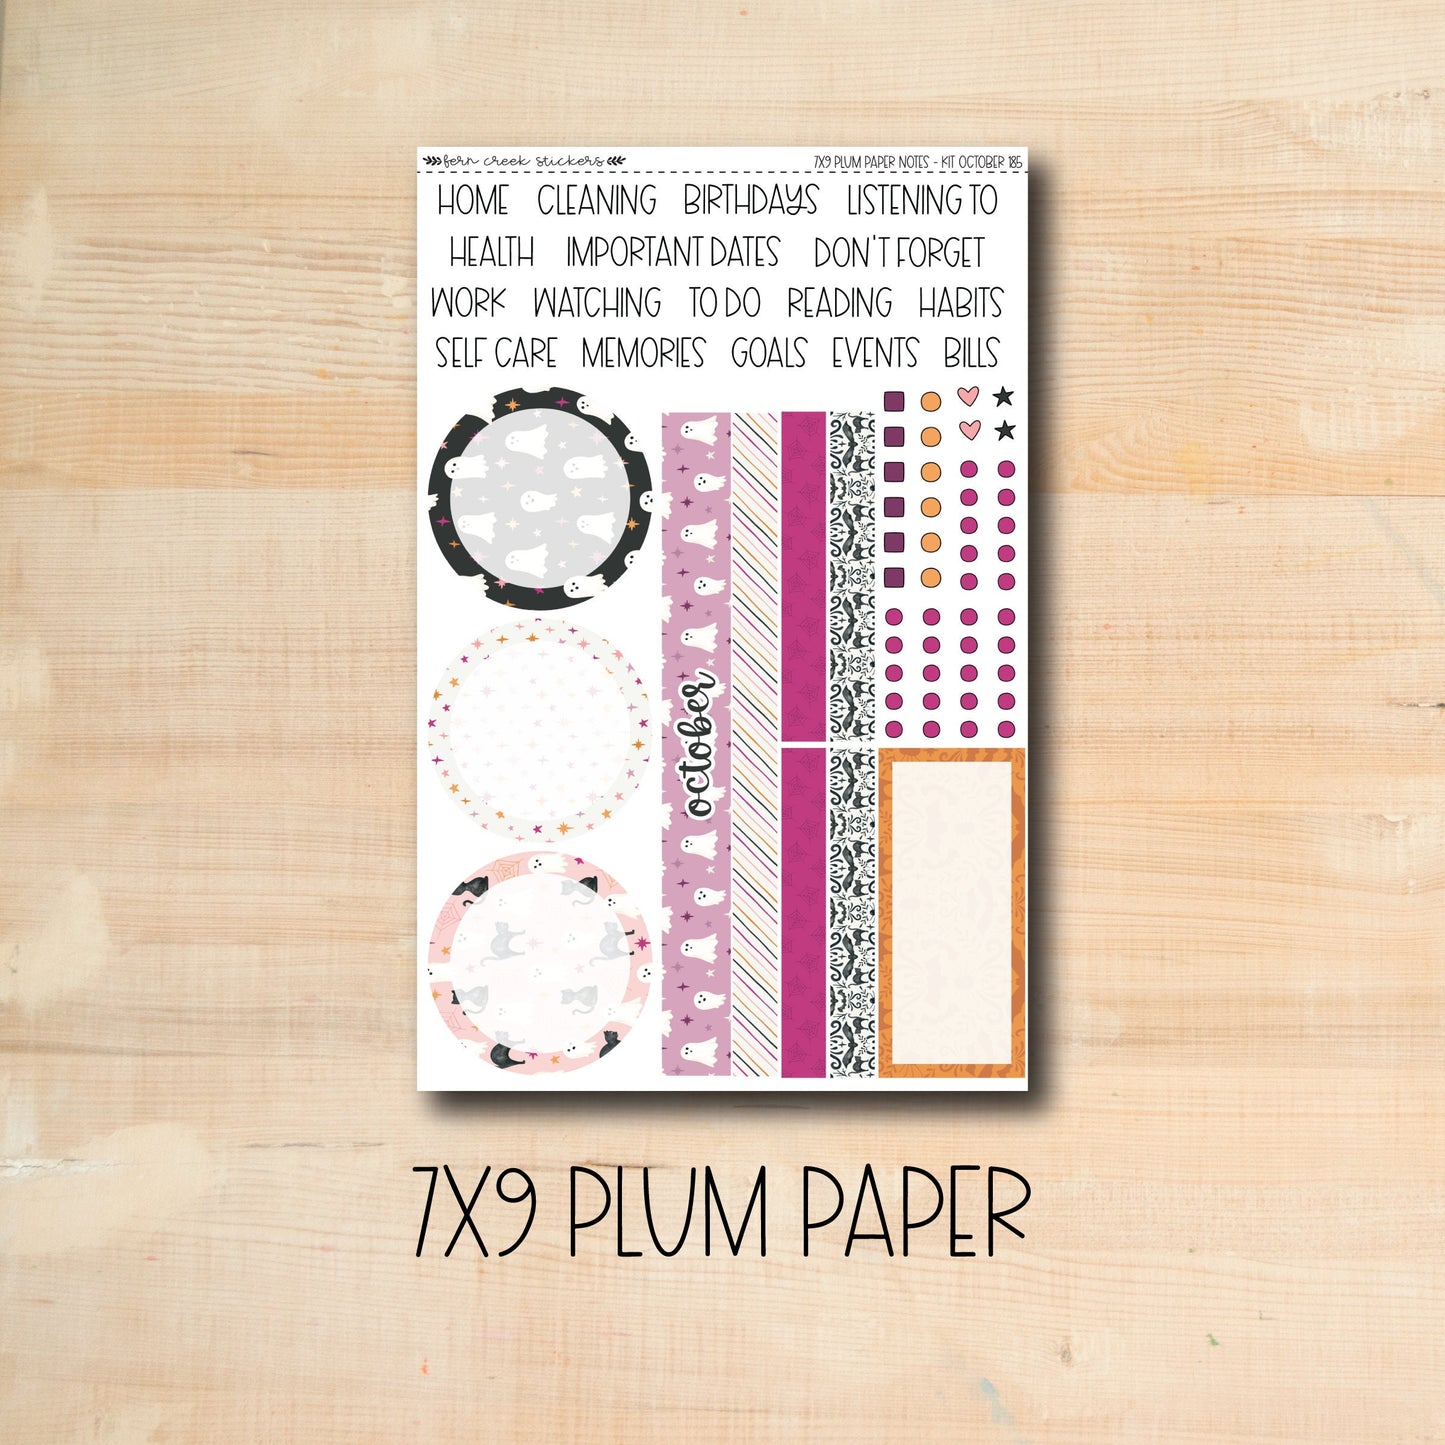 7x9 Plum NOTES-185 || CUTE HALLOWEEN 7x9 Plum Paper October notes page